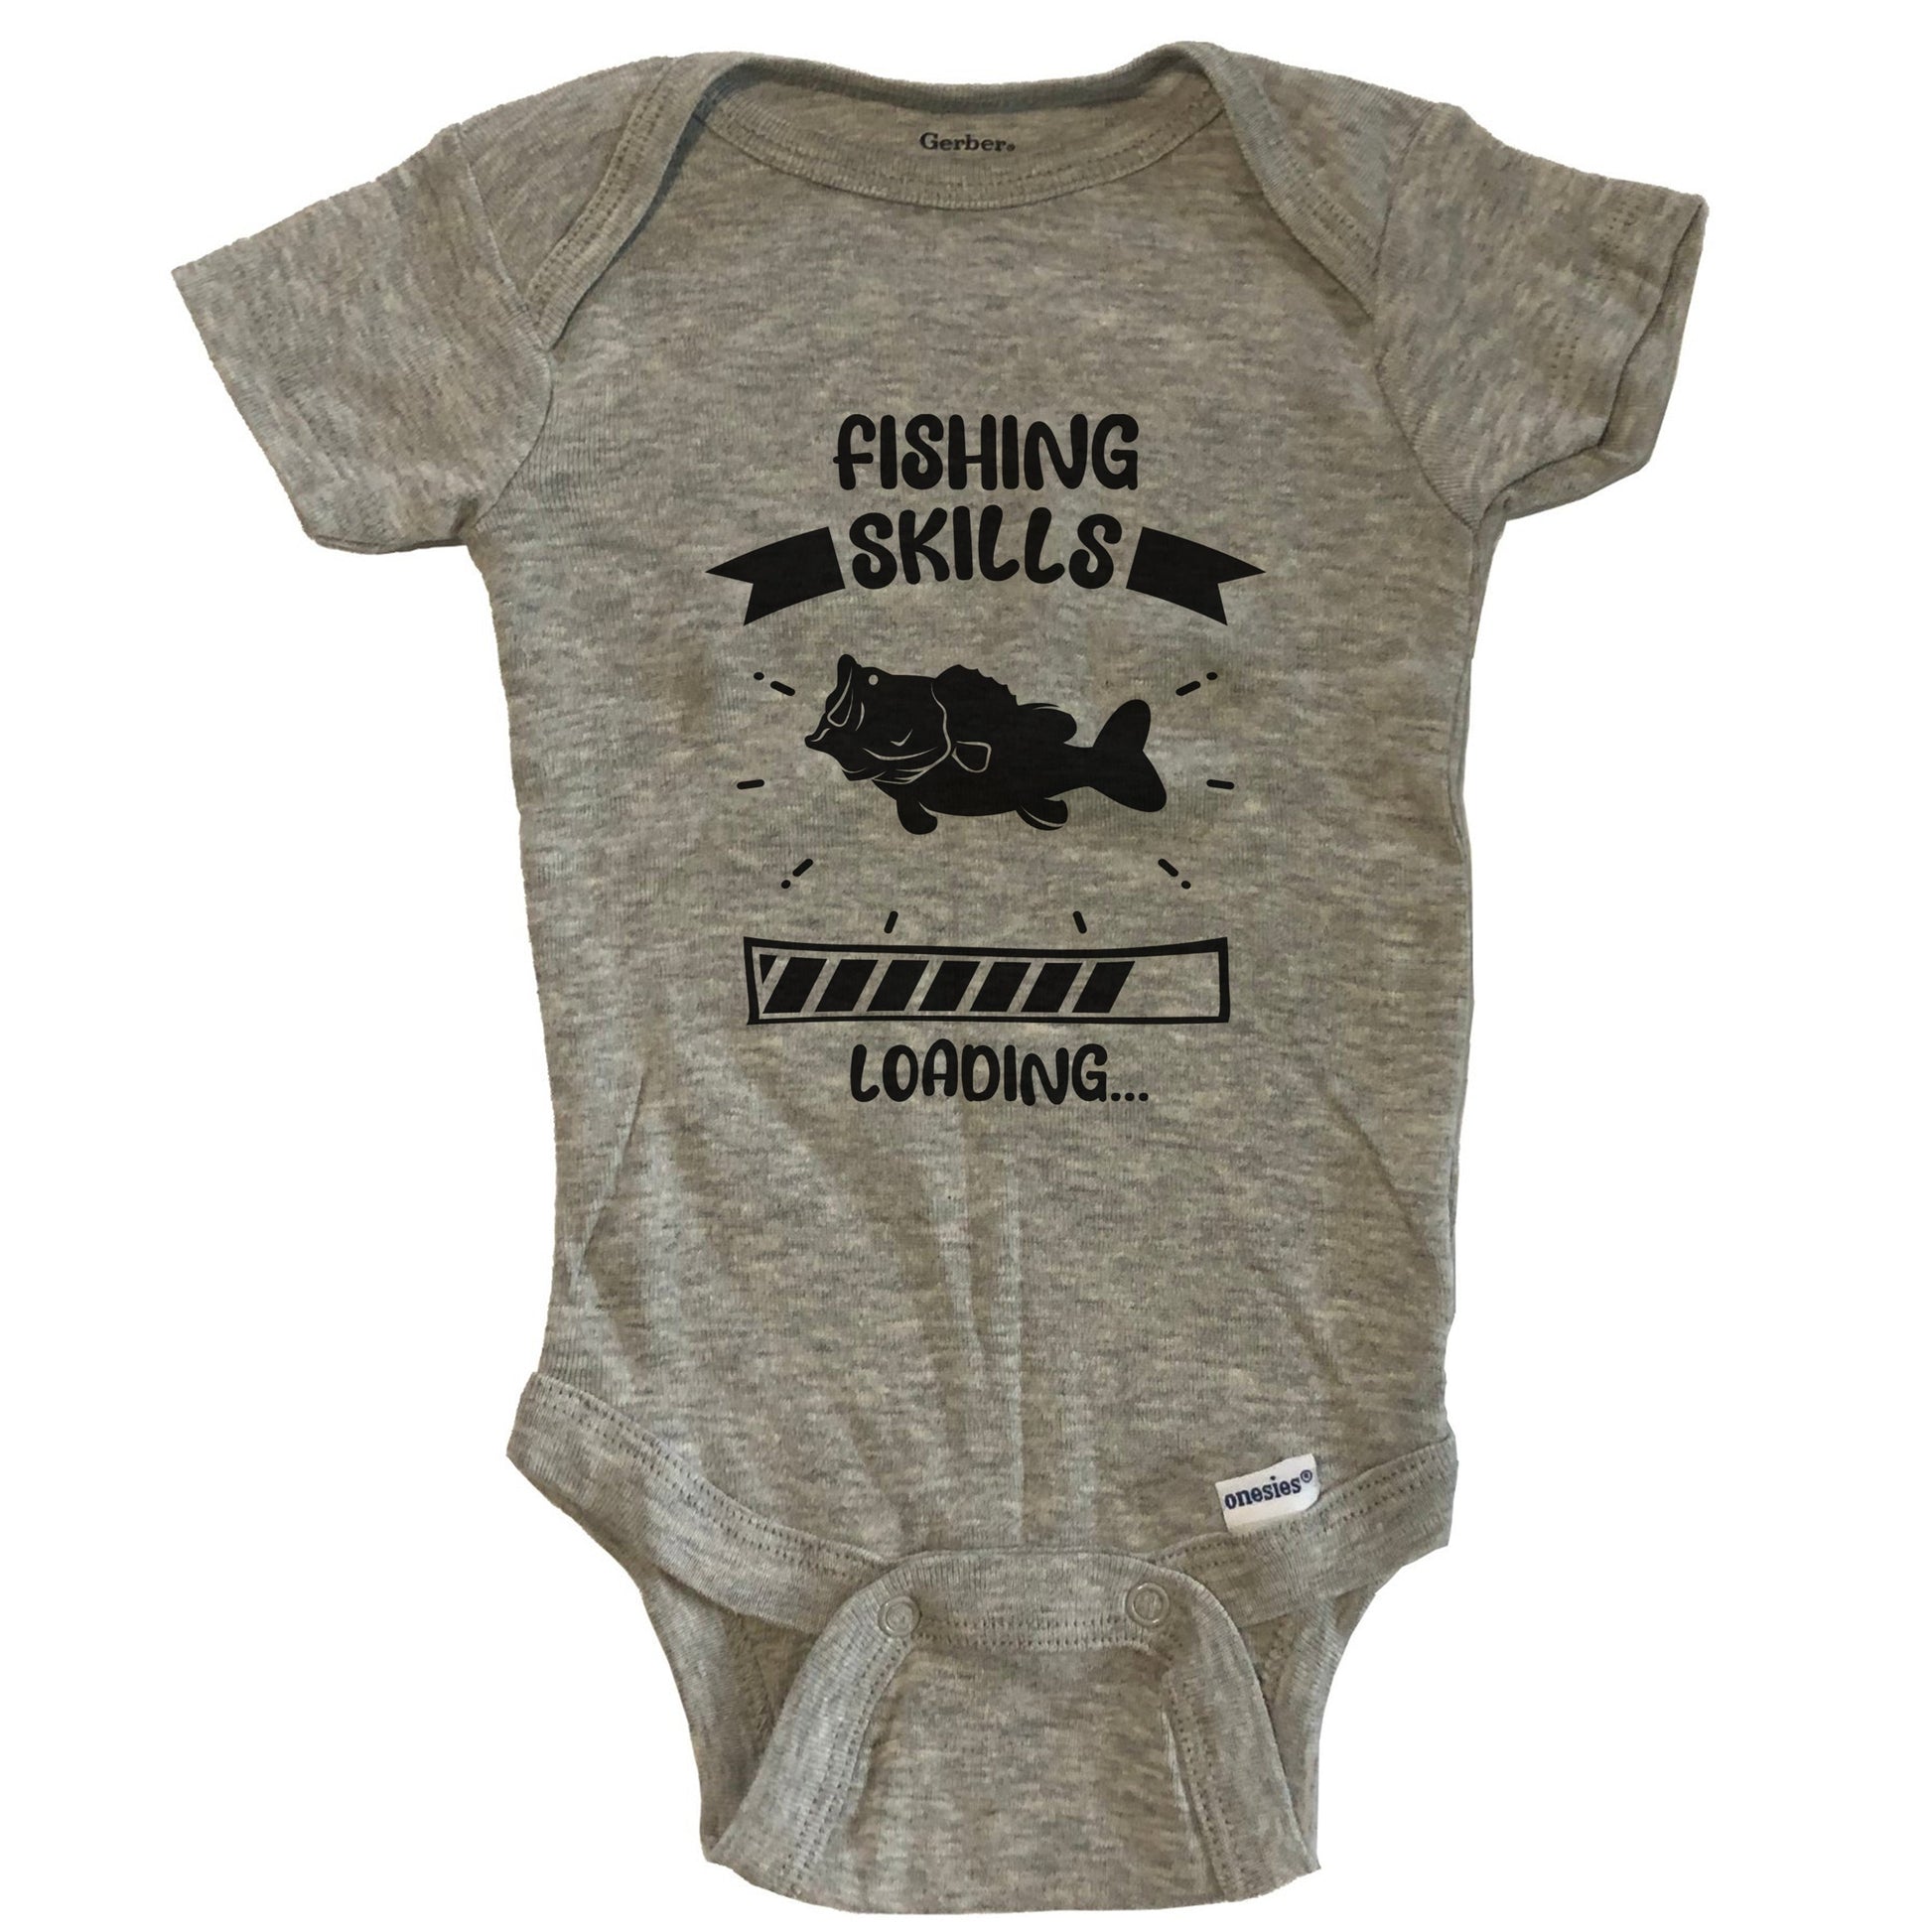 I Love Going Fishing With My Uncle One Piece Baby Bodysuit (Long Sleeve),  0-3 Months White 